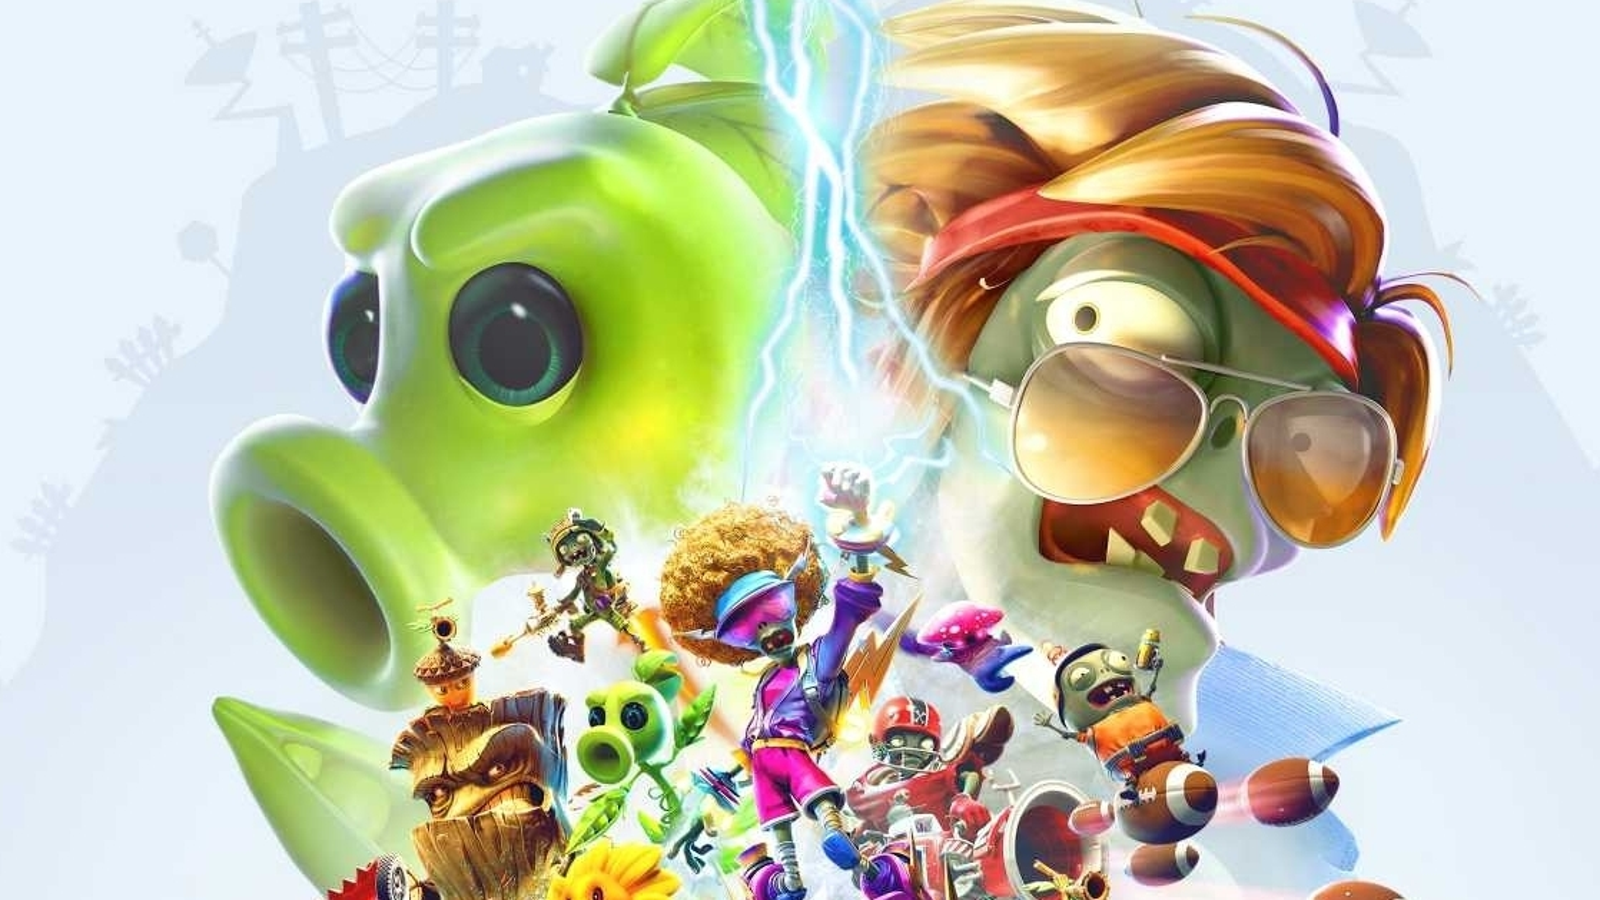 Electronic Arts - Plants vs. Zombies Garden Warfare Now Available